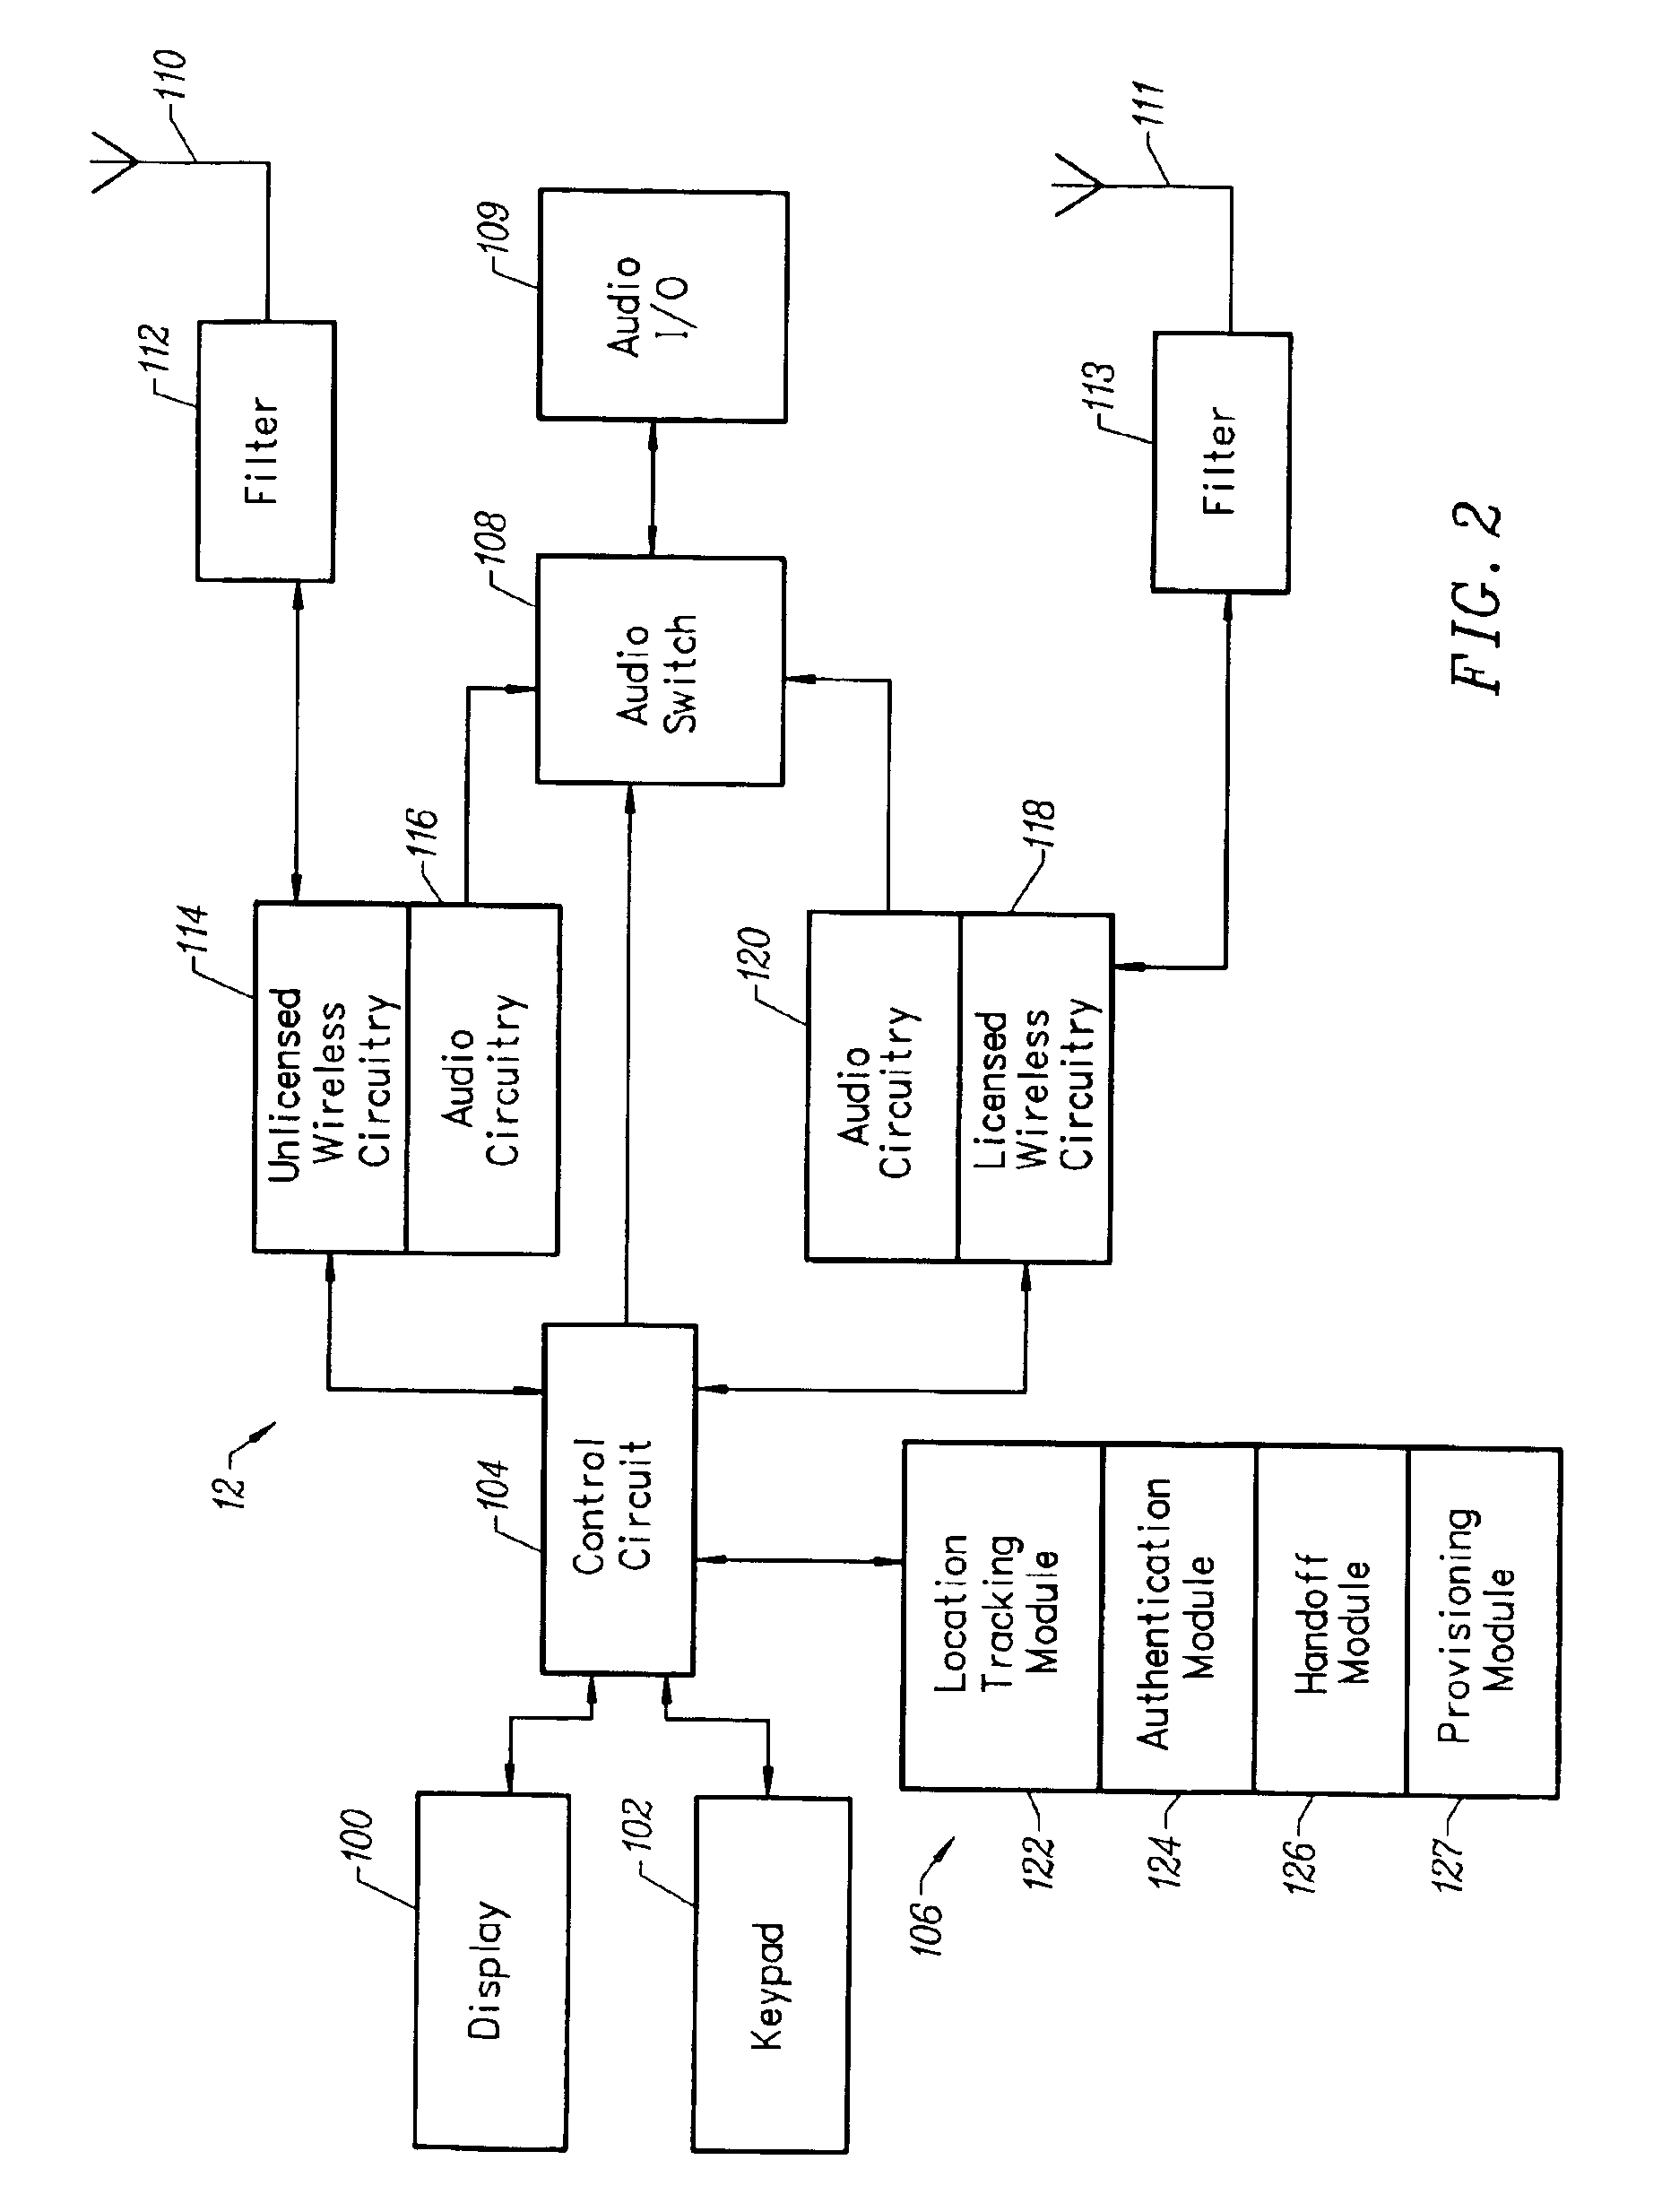 Unlicensed wireless communications base station to facilitate unlicensed and licensed wireless communications with a subscriber device, and method of operation